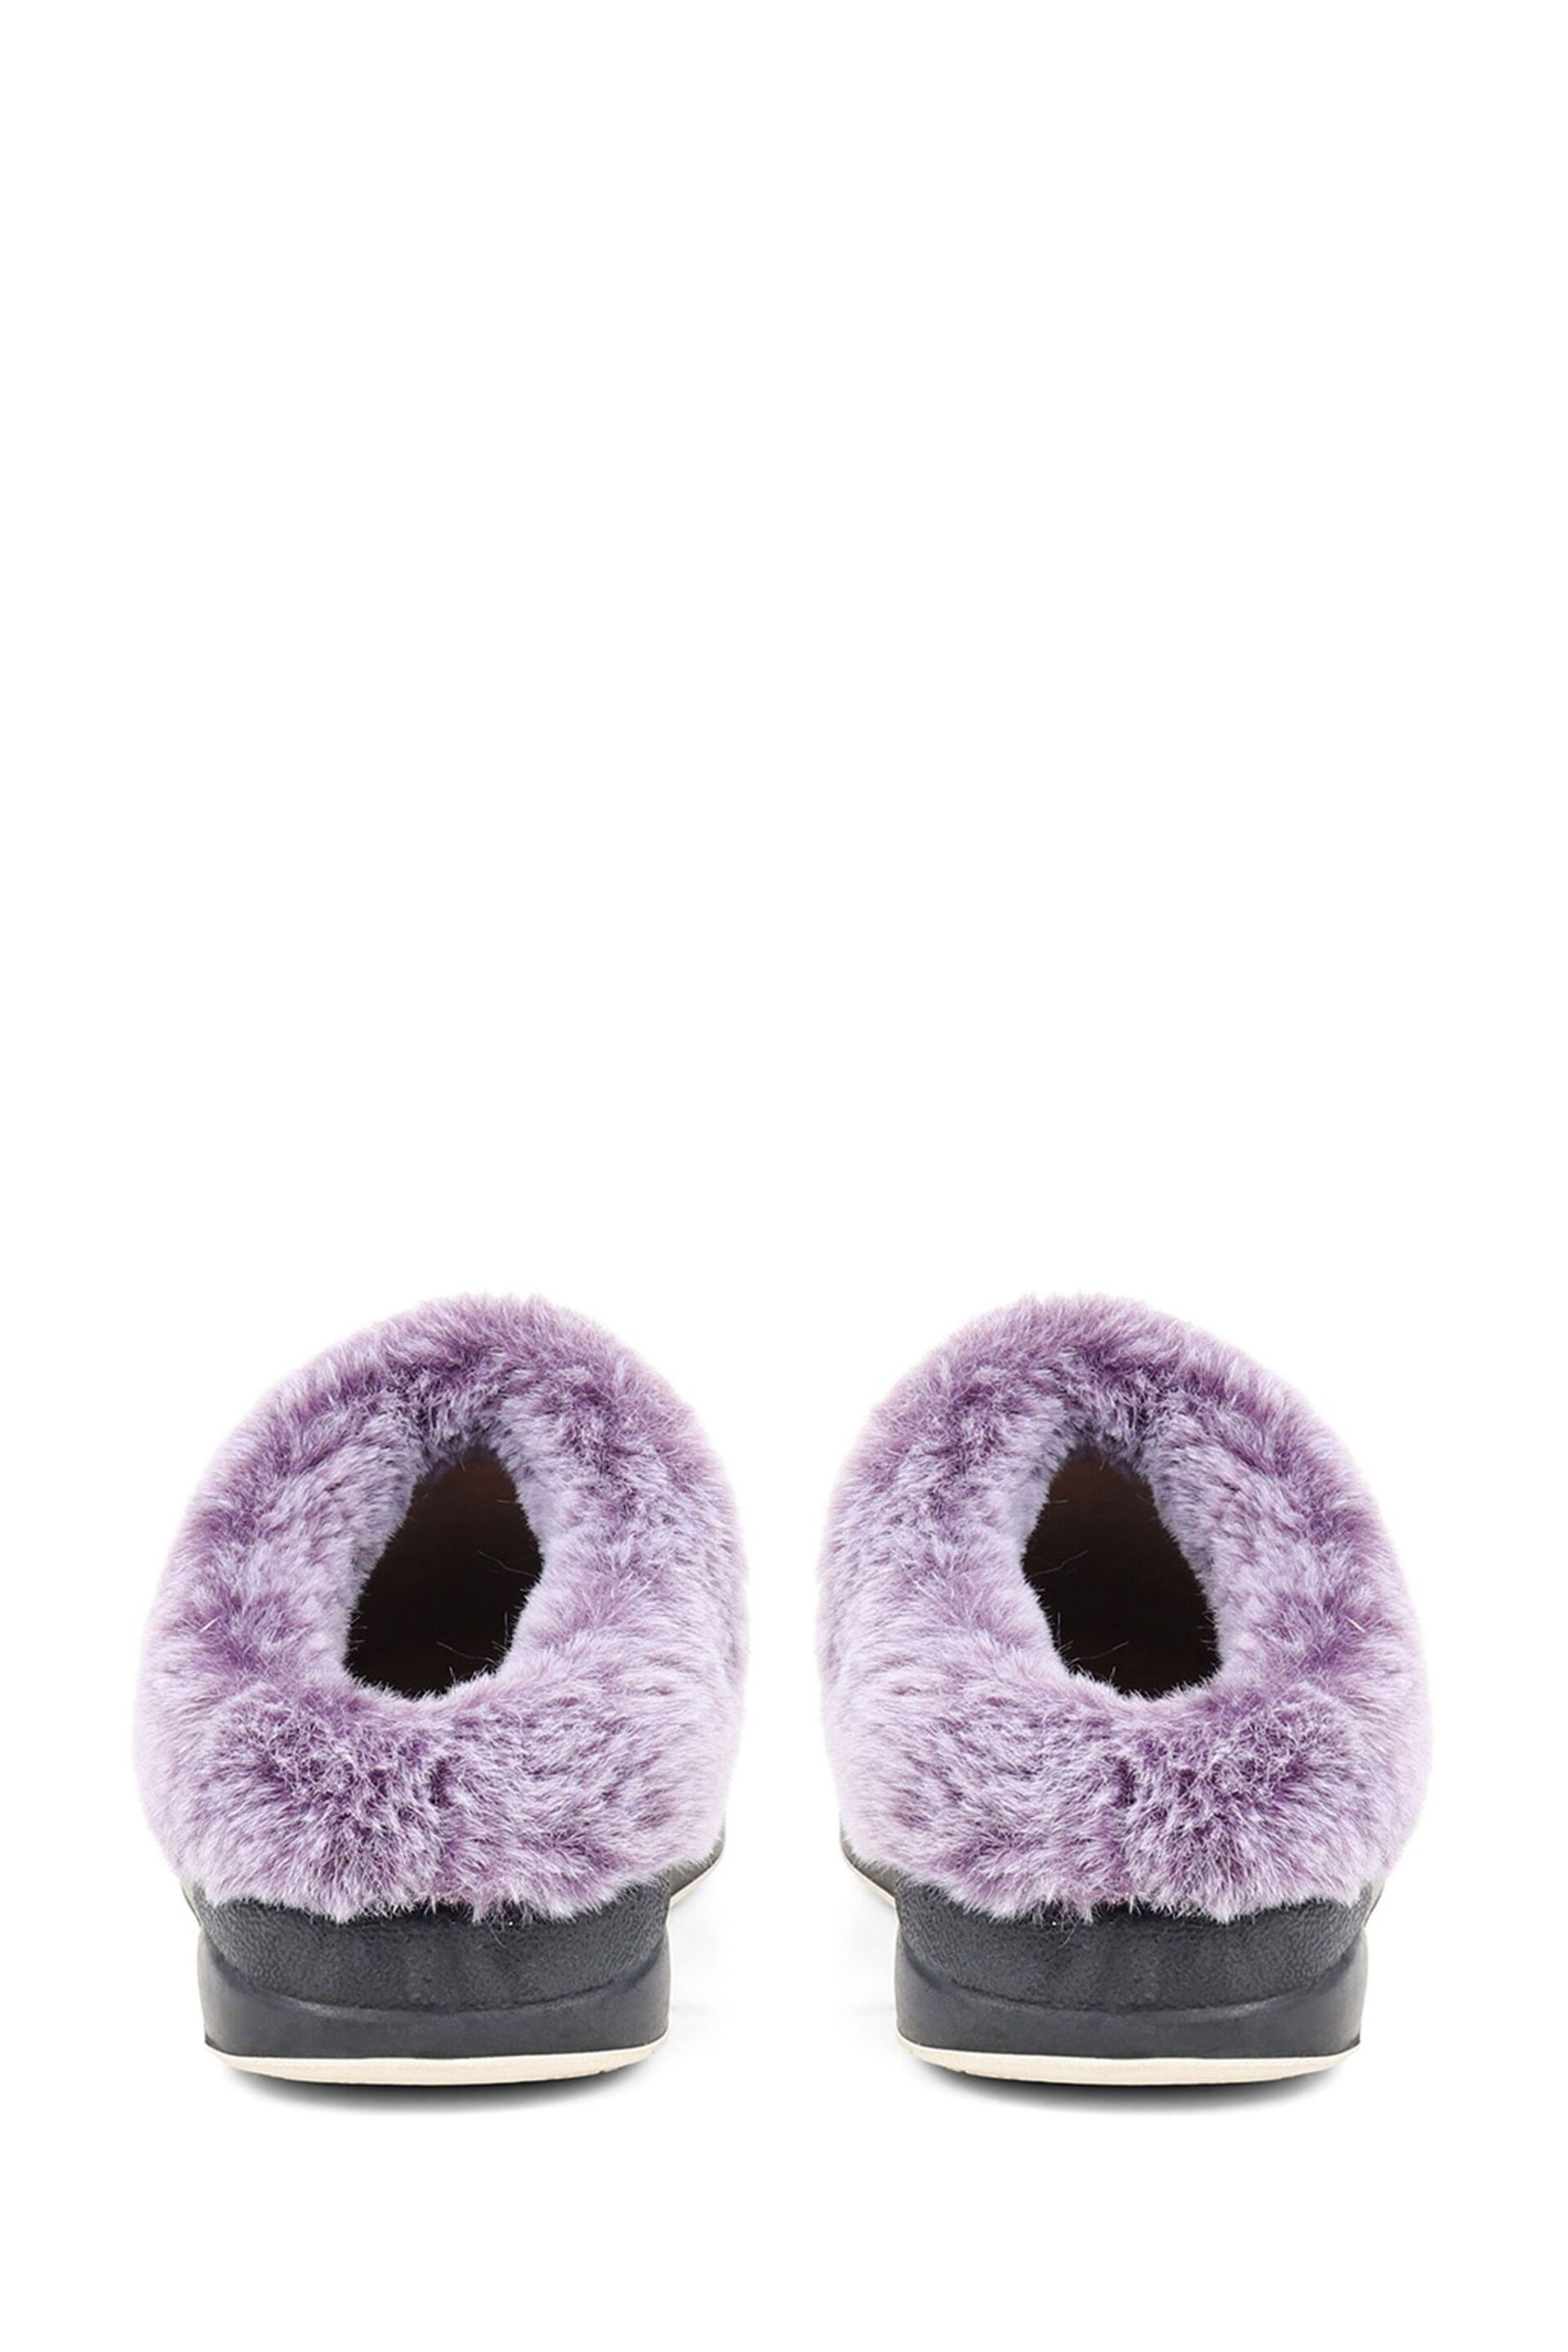 Pavers Purple Patterned Full Slippers - Image 3 of 5